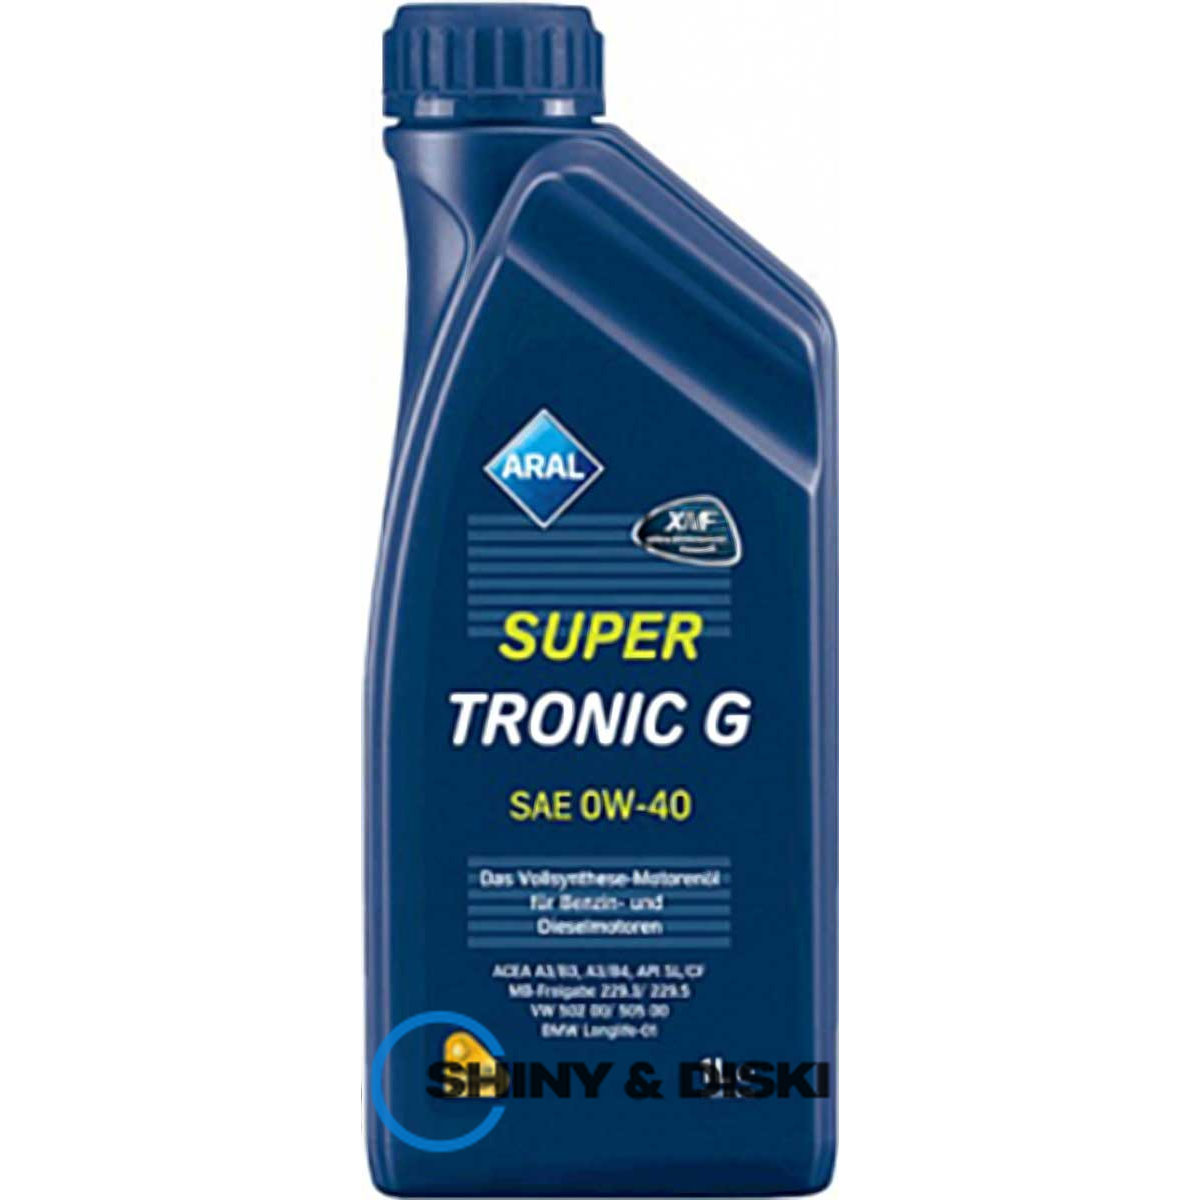 aral supertronic g sae 0w-40 (1л)